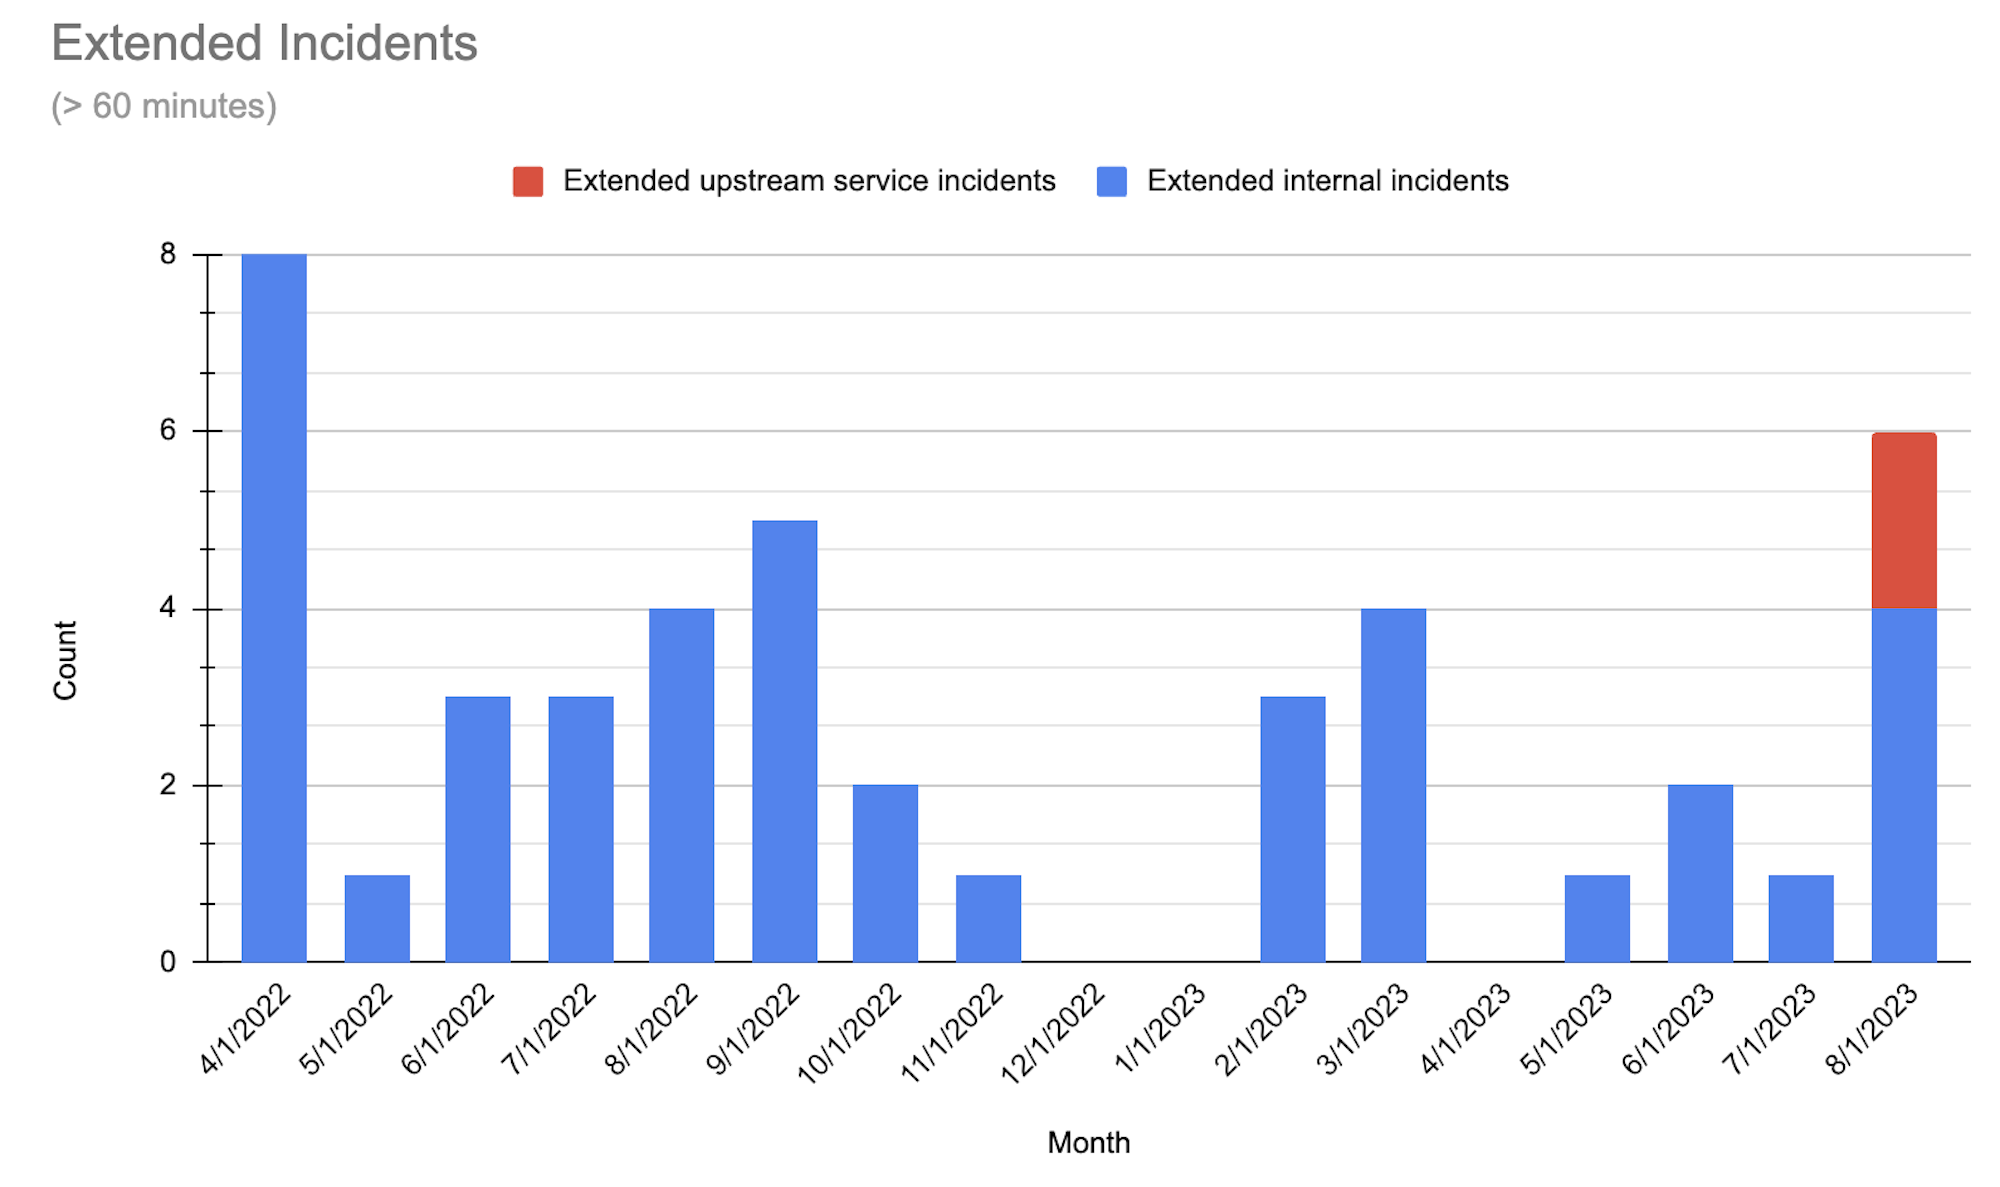 Bar chart showing the monthly count of extended incidents caused by internal and upstream factors